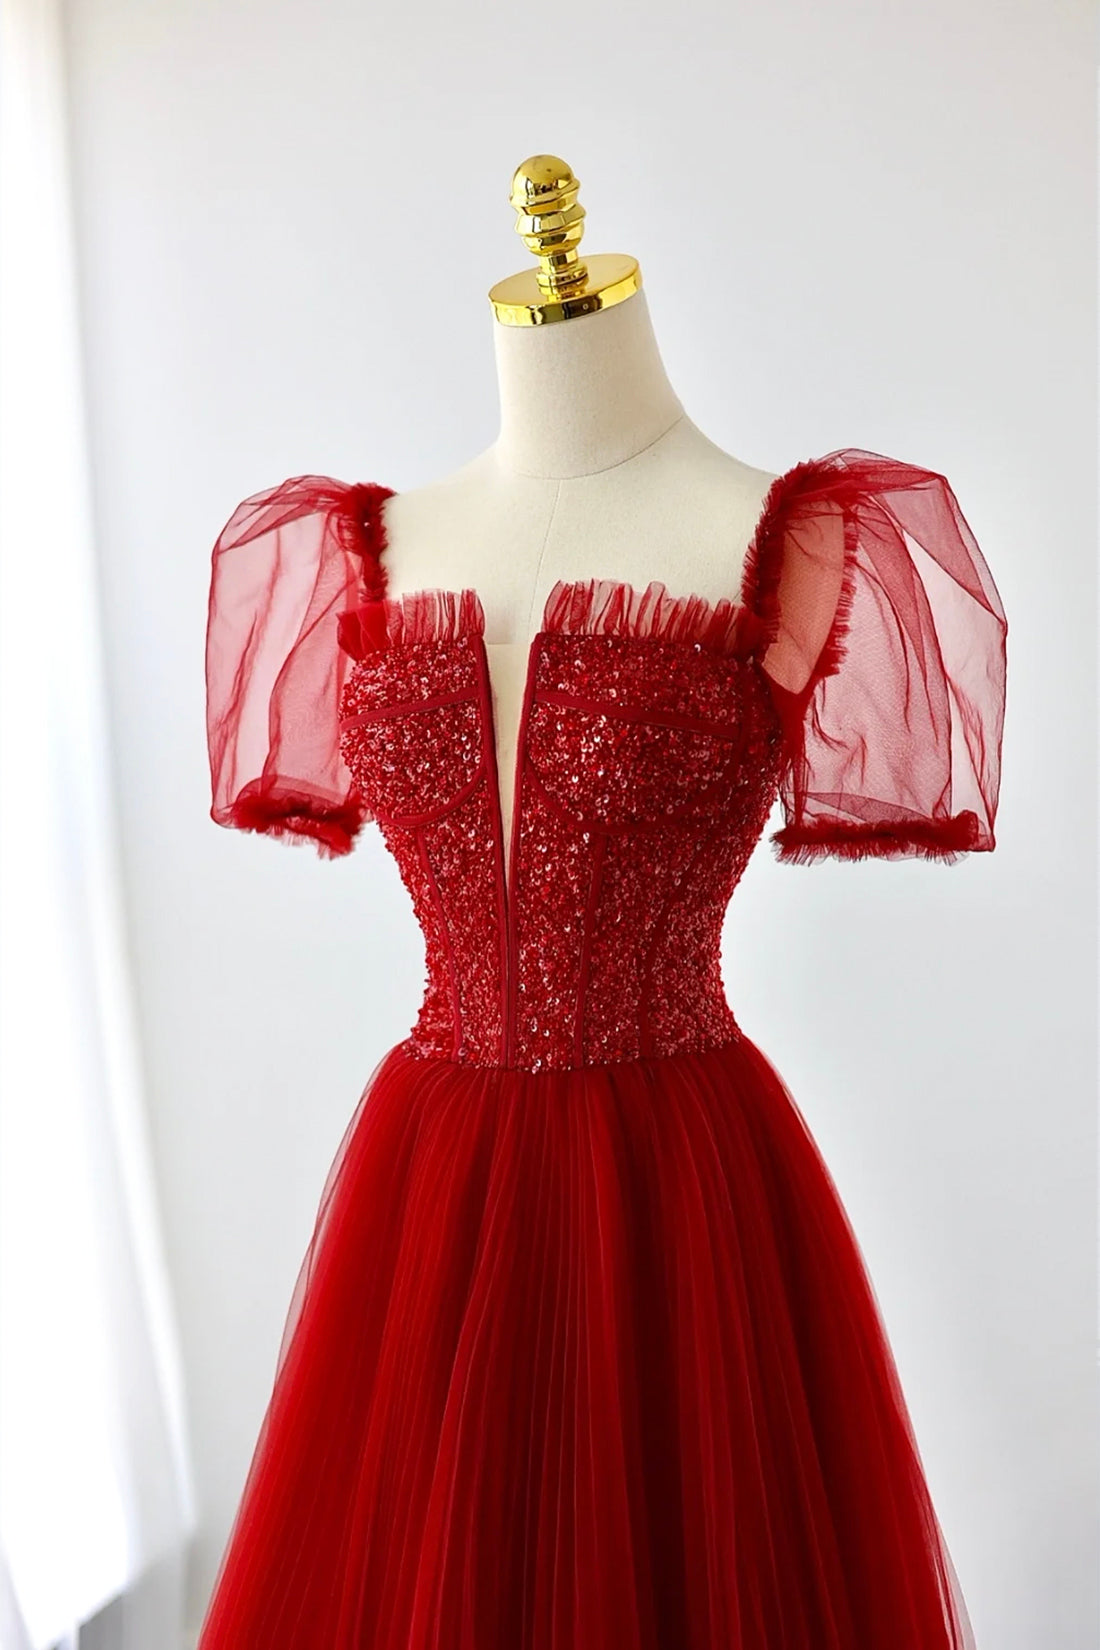 Dark Red Tulle Floor Length Formal Dress, Beautiful A-Line Short Sleeve Evening Dress with Beaded